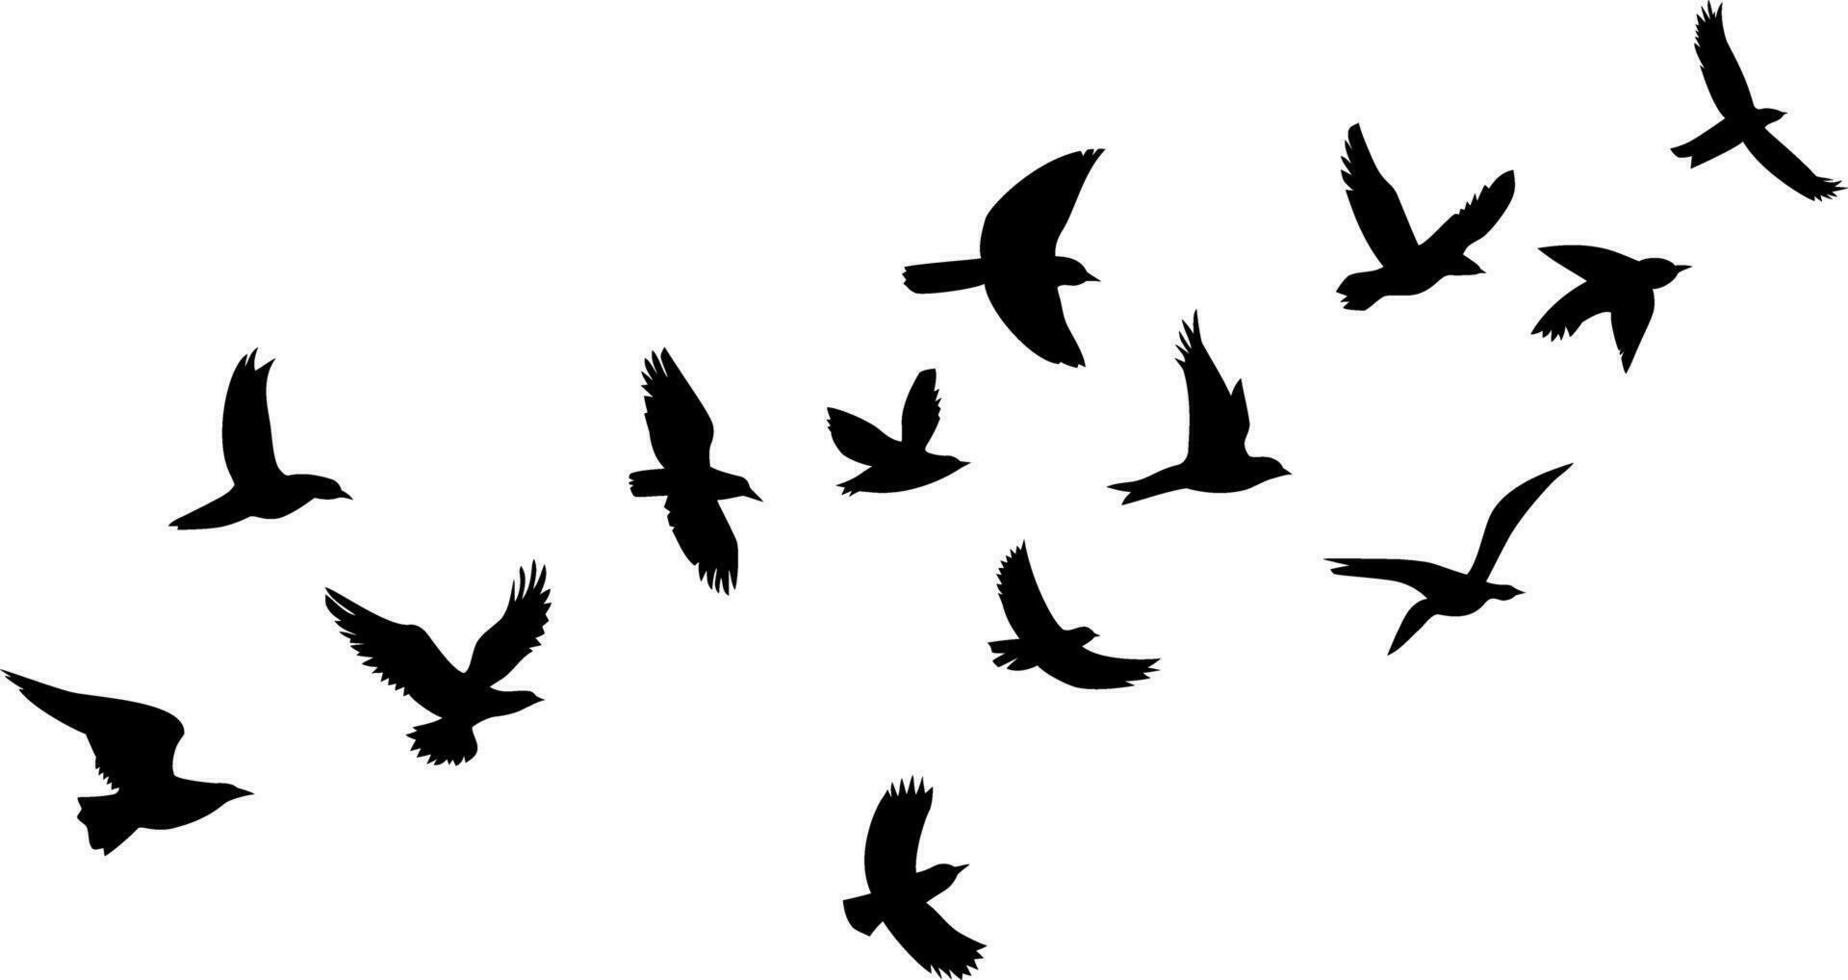 Silhouettes of flying birds on a white background. Vector illustration